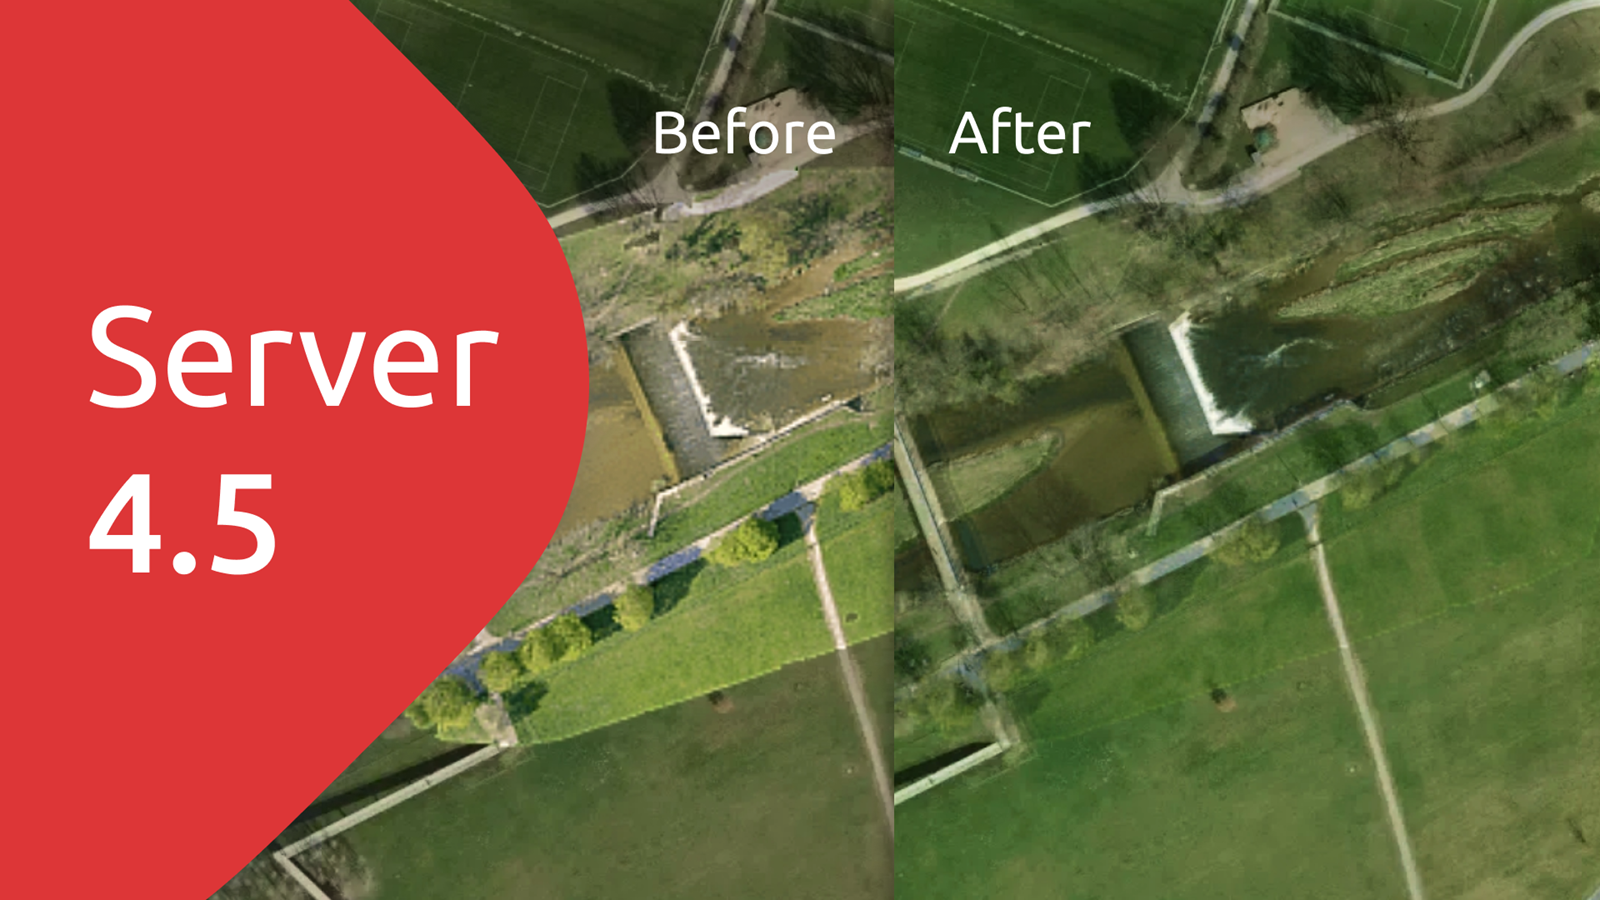 MapTiler Server now has color toning to create beautiful, seamless maps from multiple layers